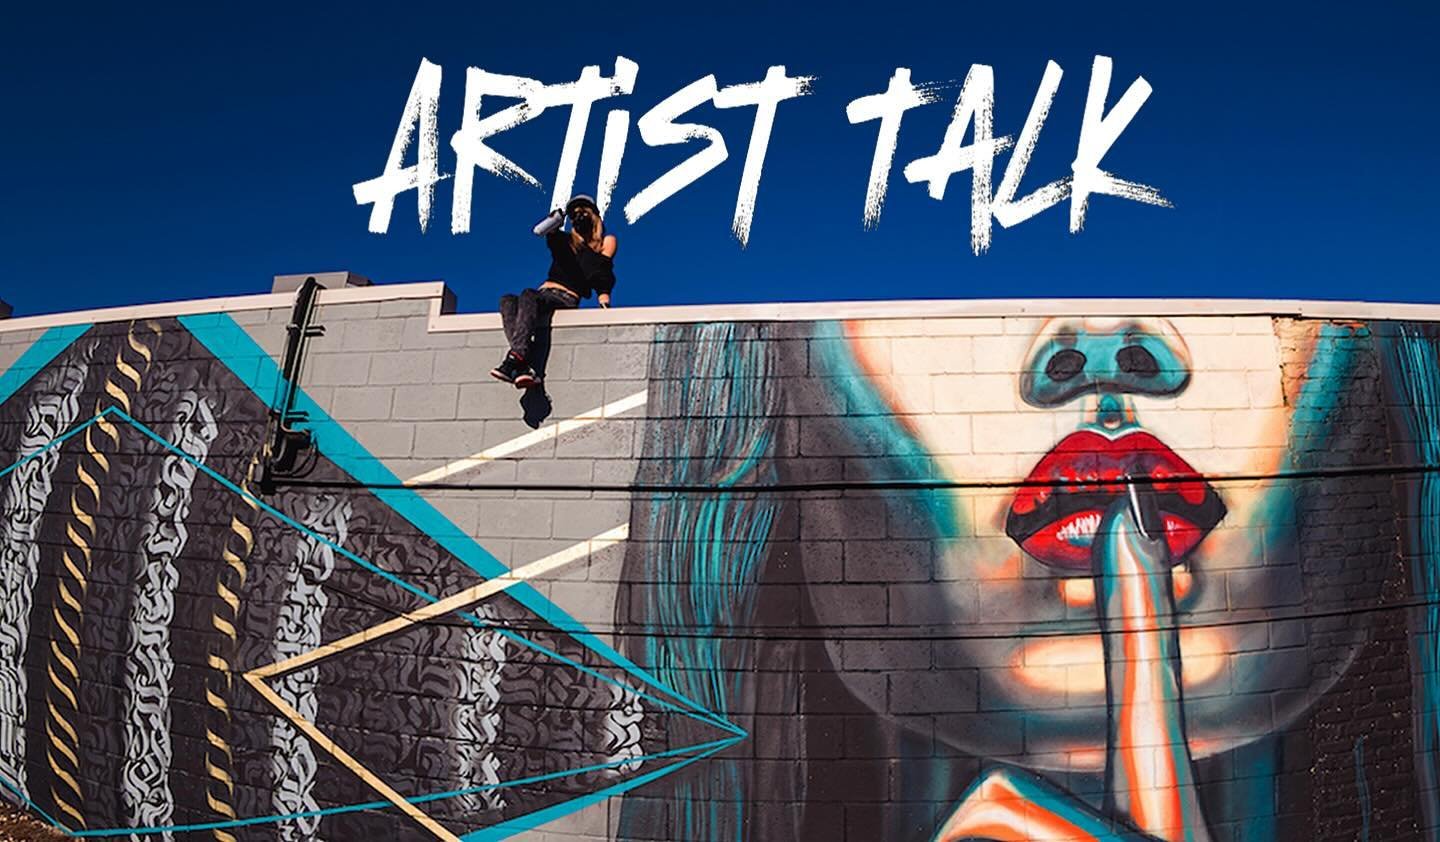 AUDIFAX ARTIST TALK 
Saturday May 18th
1pm - Overture Center for The Arts
In the Wisconsin Studio / Approximately 1.5hrs
(Of interest to teens / adults)

From Street Art in Barcelona to murals in the U.S., I&rsquo;ll guide you through my empowering j